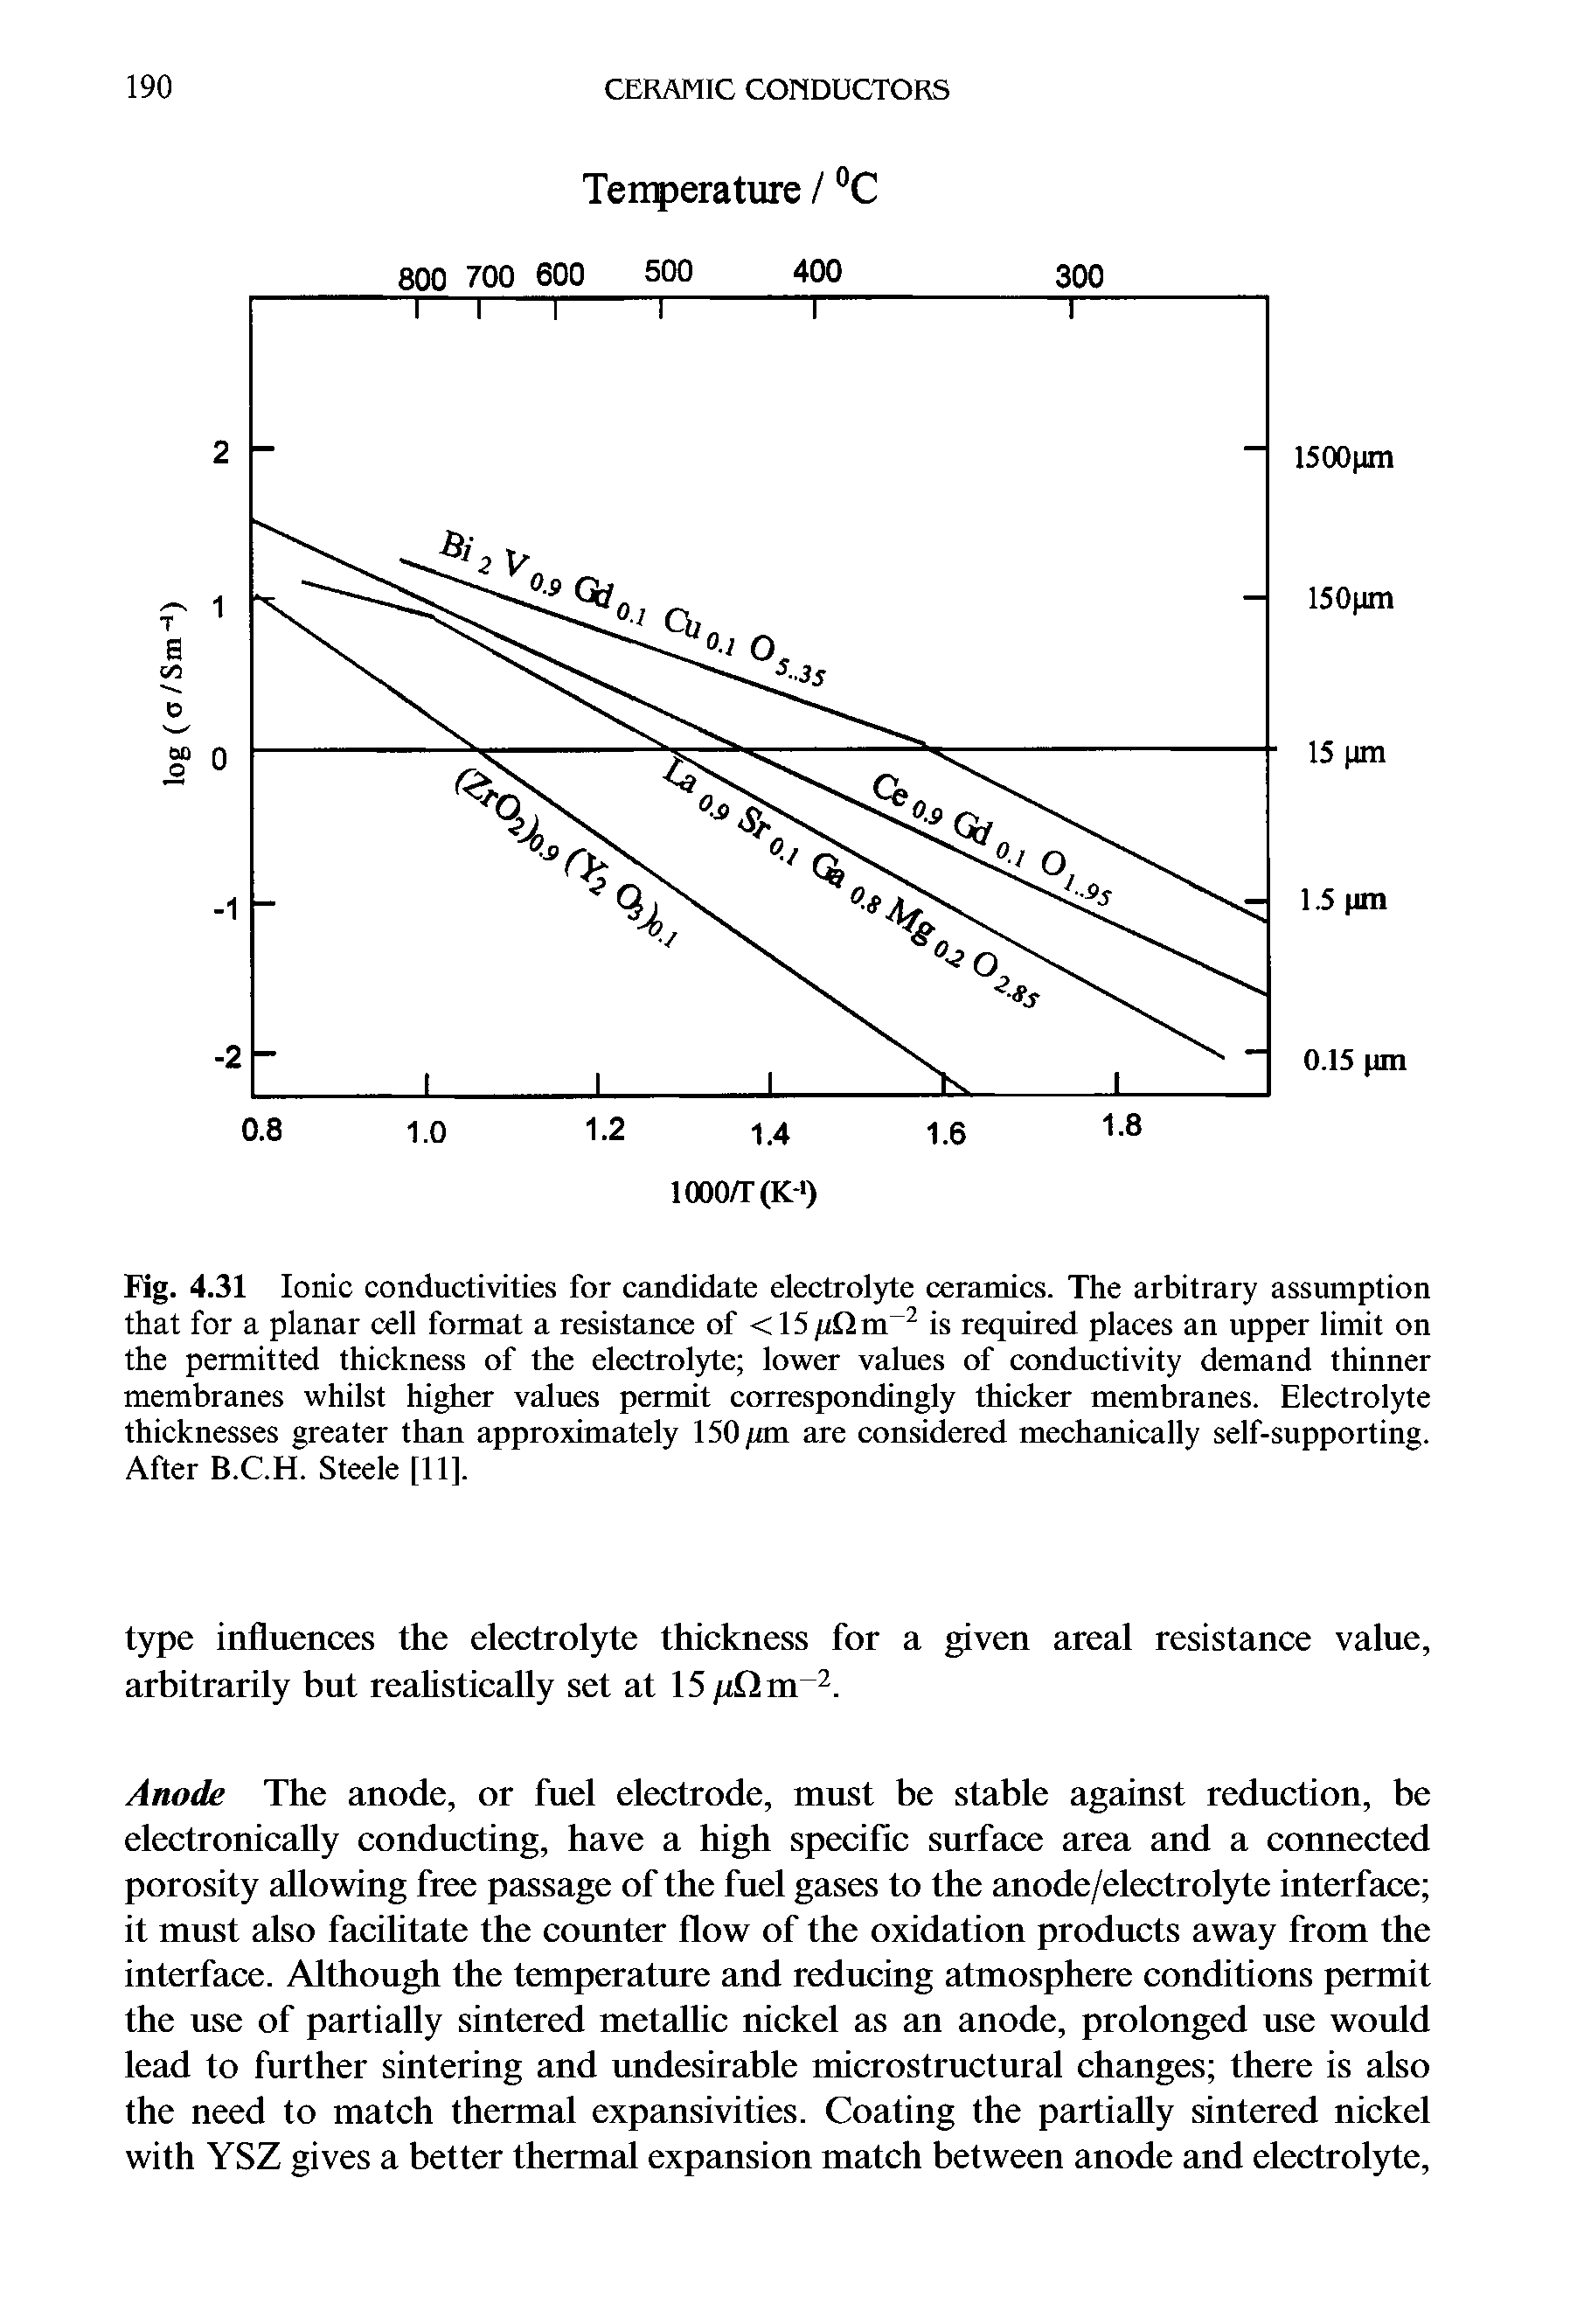 Fig. 4.31 Ionic conductivities for candidate electrolyte ceramics. The arbitrary assumption that for a planar cell format a resistance of <15 gQm 2 is required places an upper limit on the permitted thickness of the electrolyte lower values of conductivity demand thinner membranes whilst higher values permit correspondingly thicker membranes. Electrolyte thicknesses greater than approximately 150/an are considered mechanically self-supporting. After B.C.H. Steele [11],...